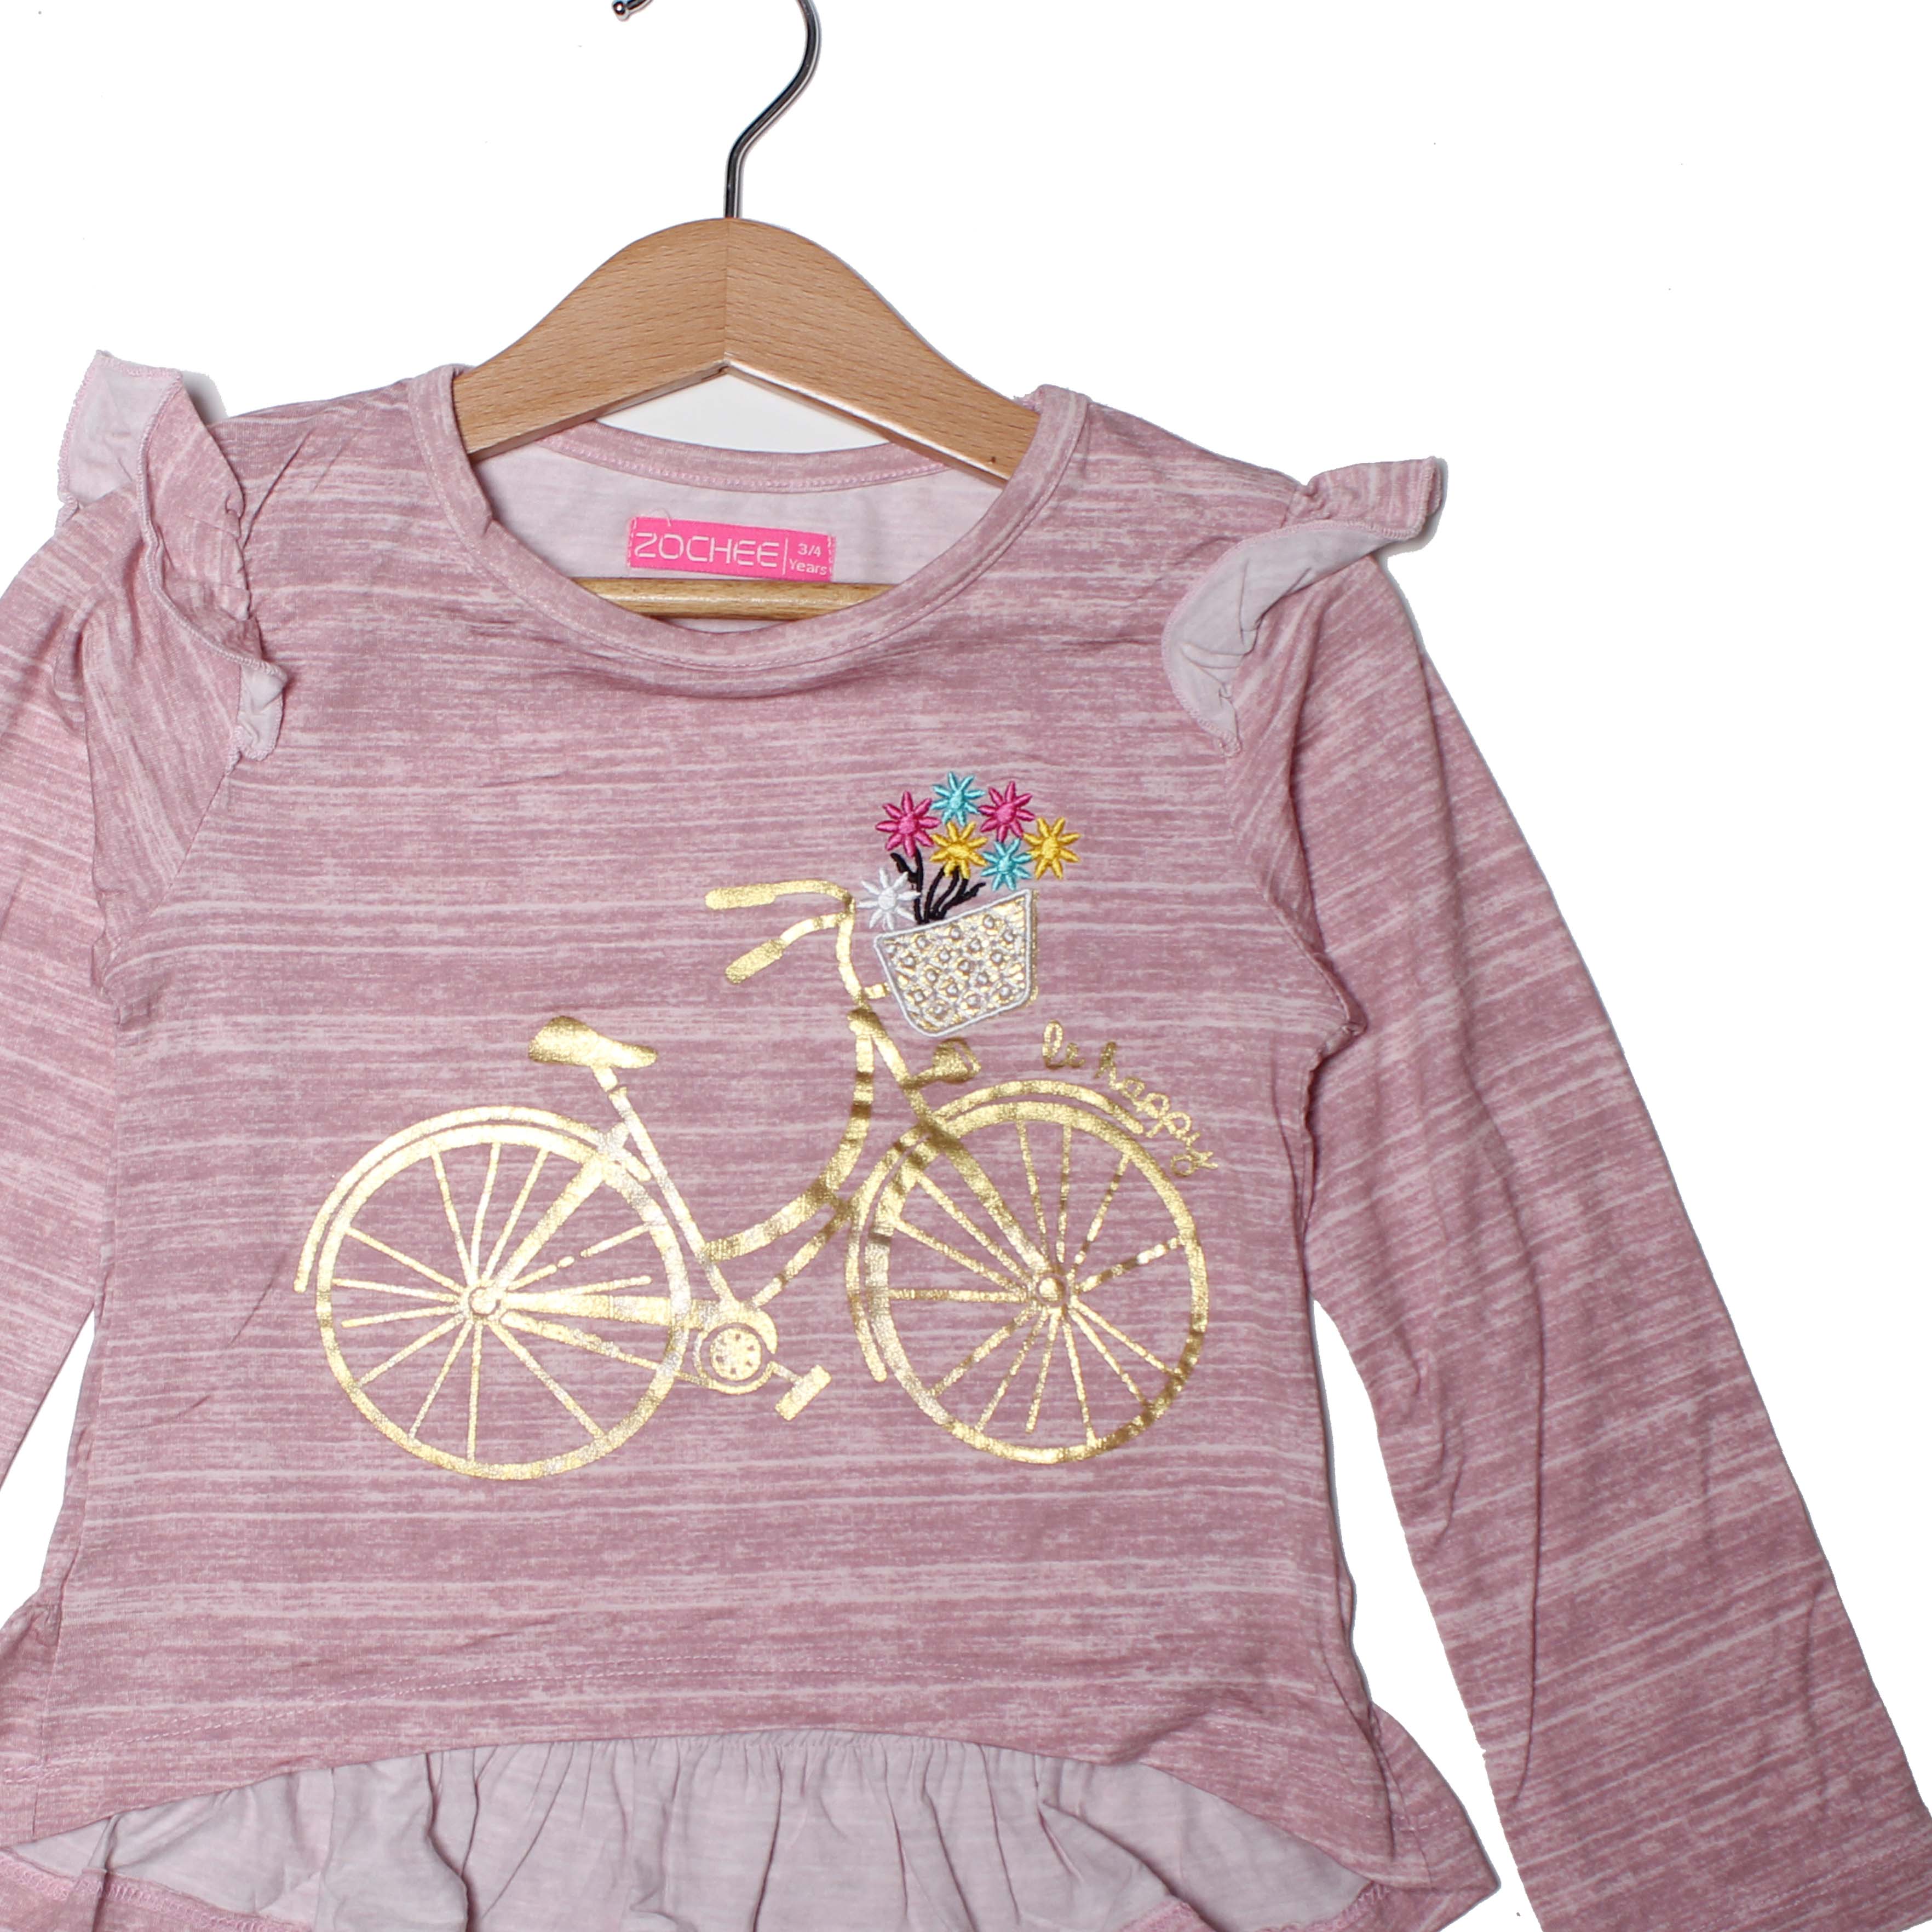 NEW PINK CYCLE PRINTED TOP FOR GIRLS